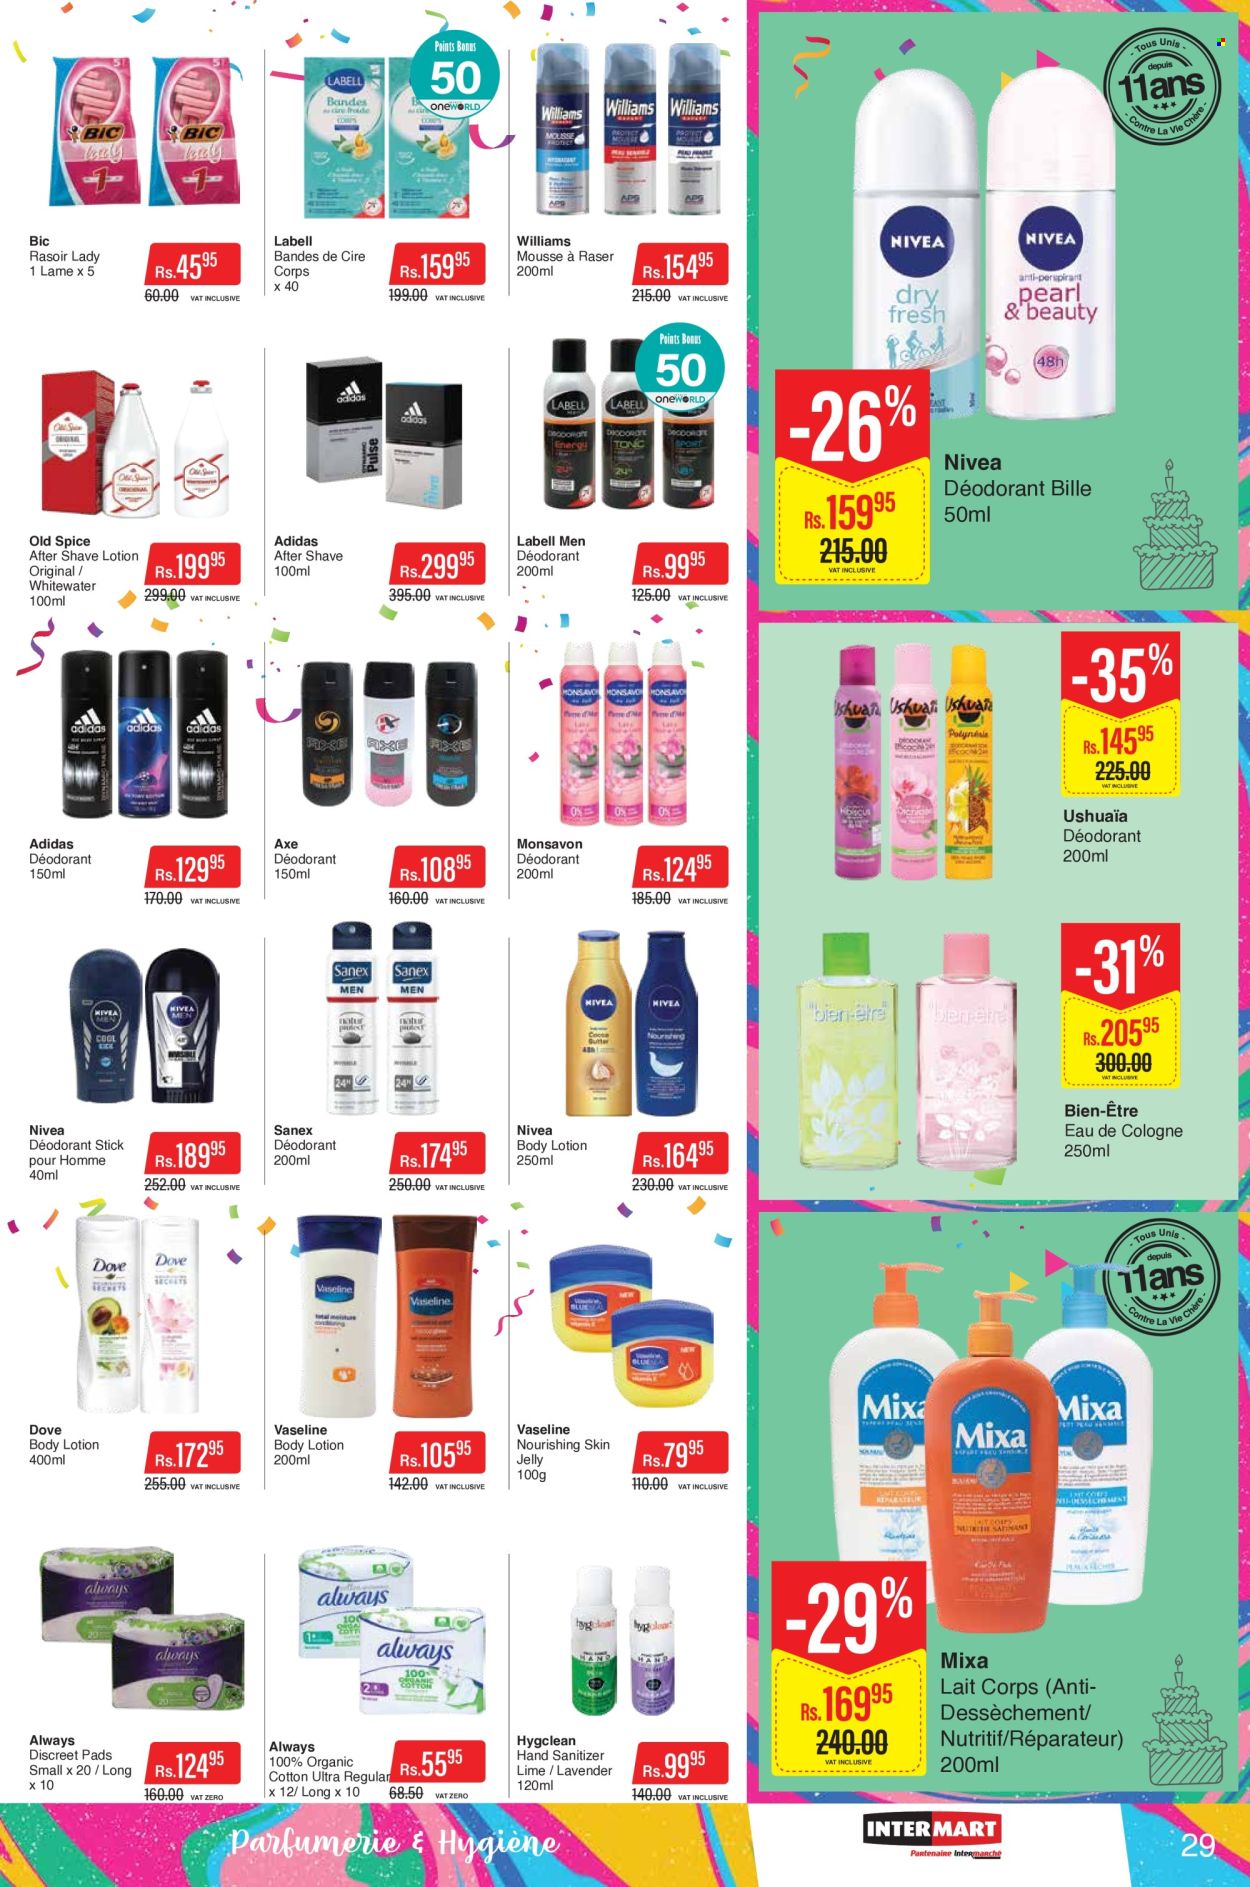 Intermart Catalogue - 21.10.2022 - 7.11.2022 - Sales products - Dove, jelly, spice, Nivea, Vaseline, sanitary pads, Always Discreet, body lotion, after shave, anti-perspirant, cologne, Sanex, Axe, BIC, hand sanitizer, Adidas, Old Spice, deodorant. Page 29.